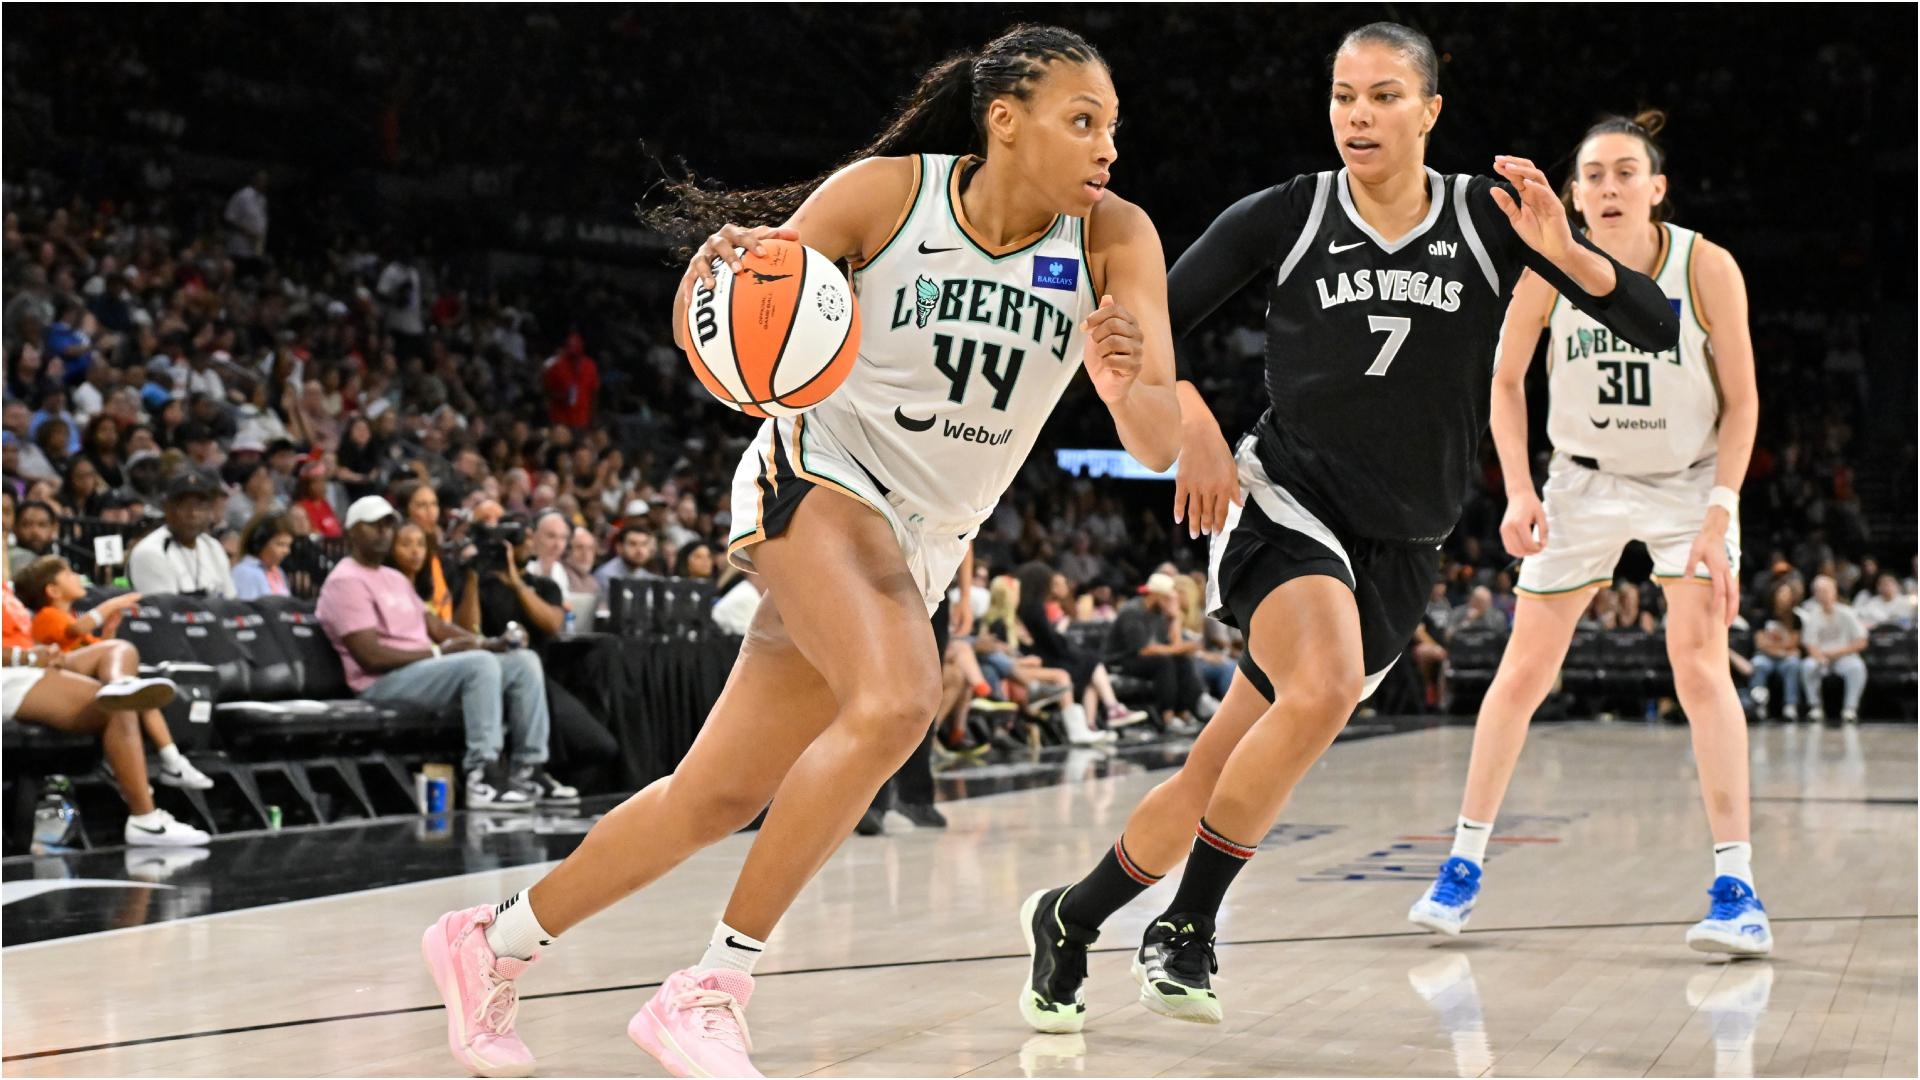 New York's strong second half powers Liberty over Aces